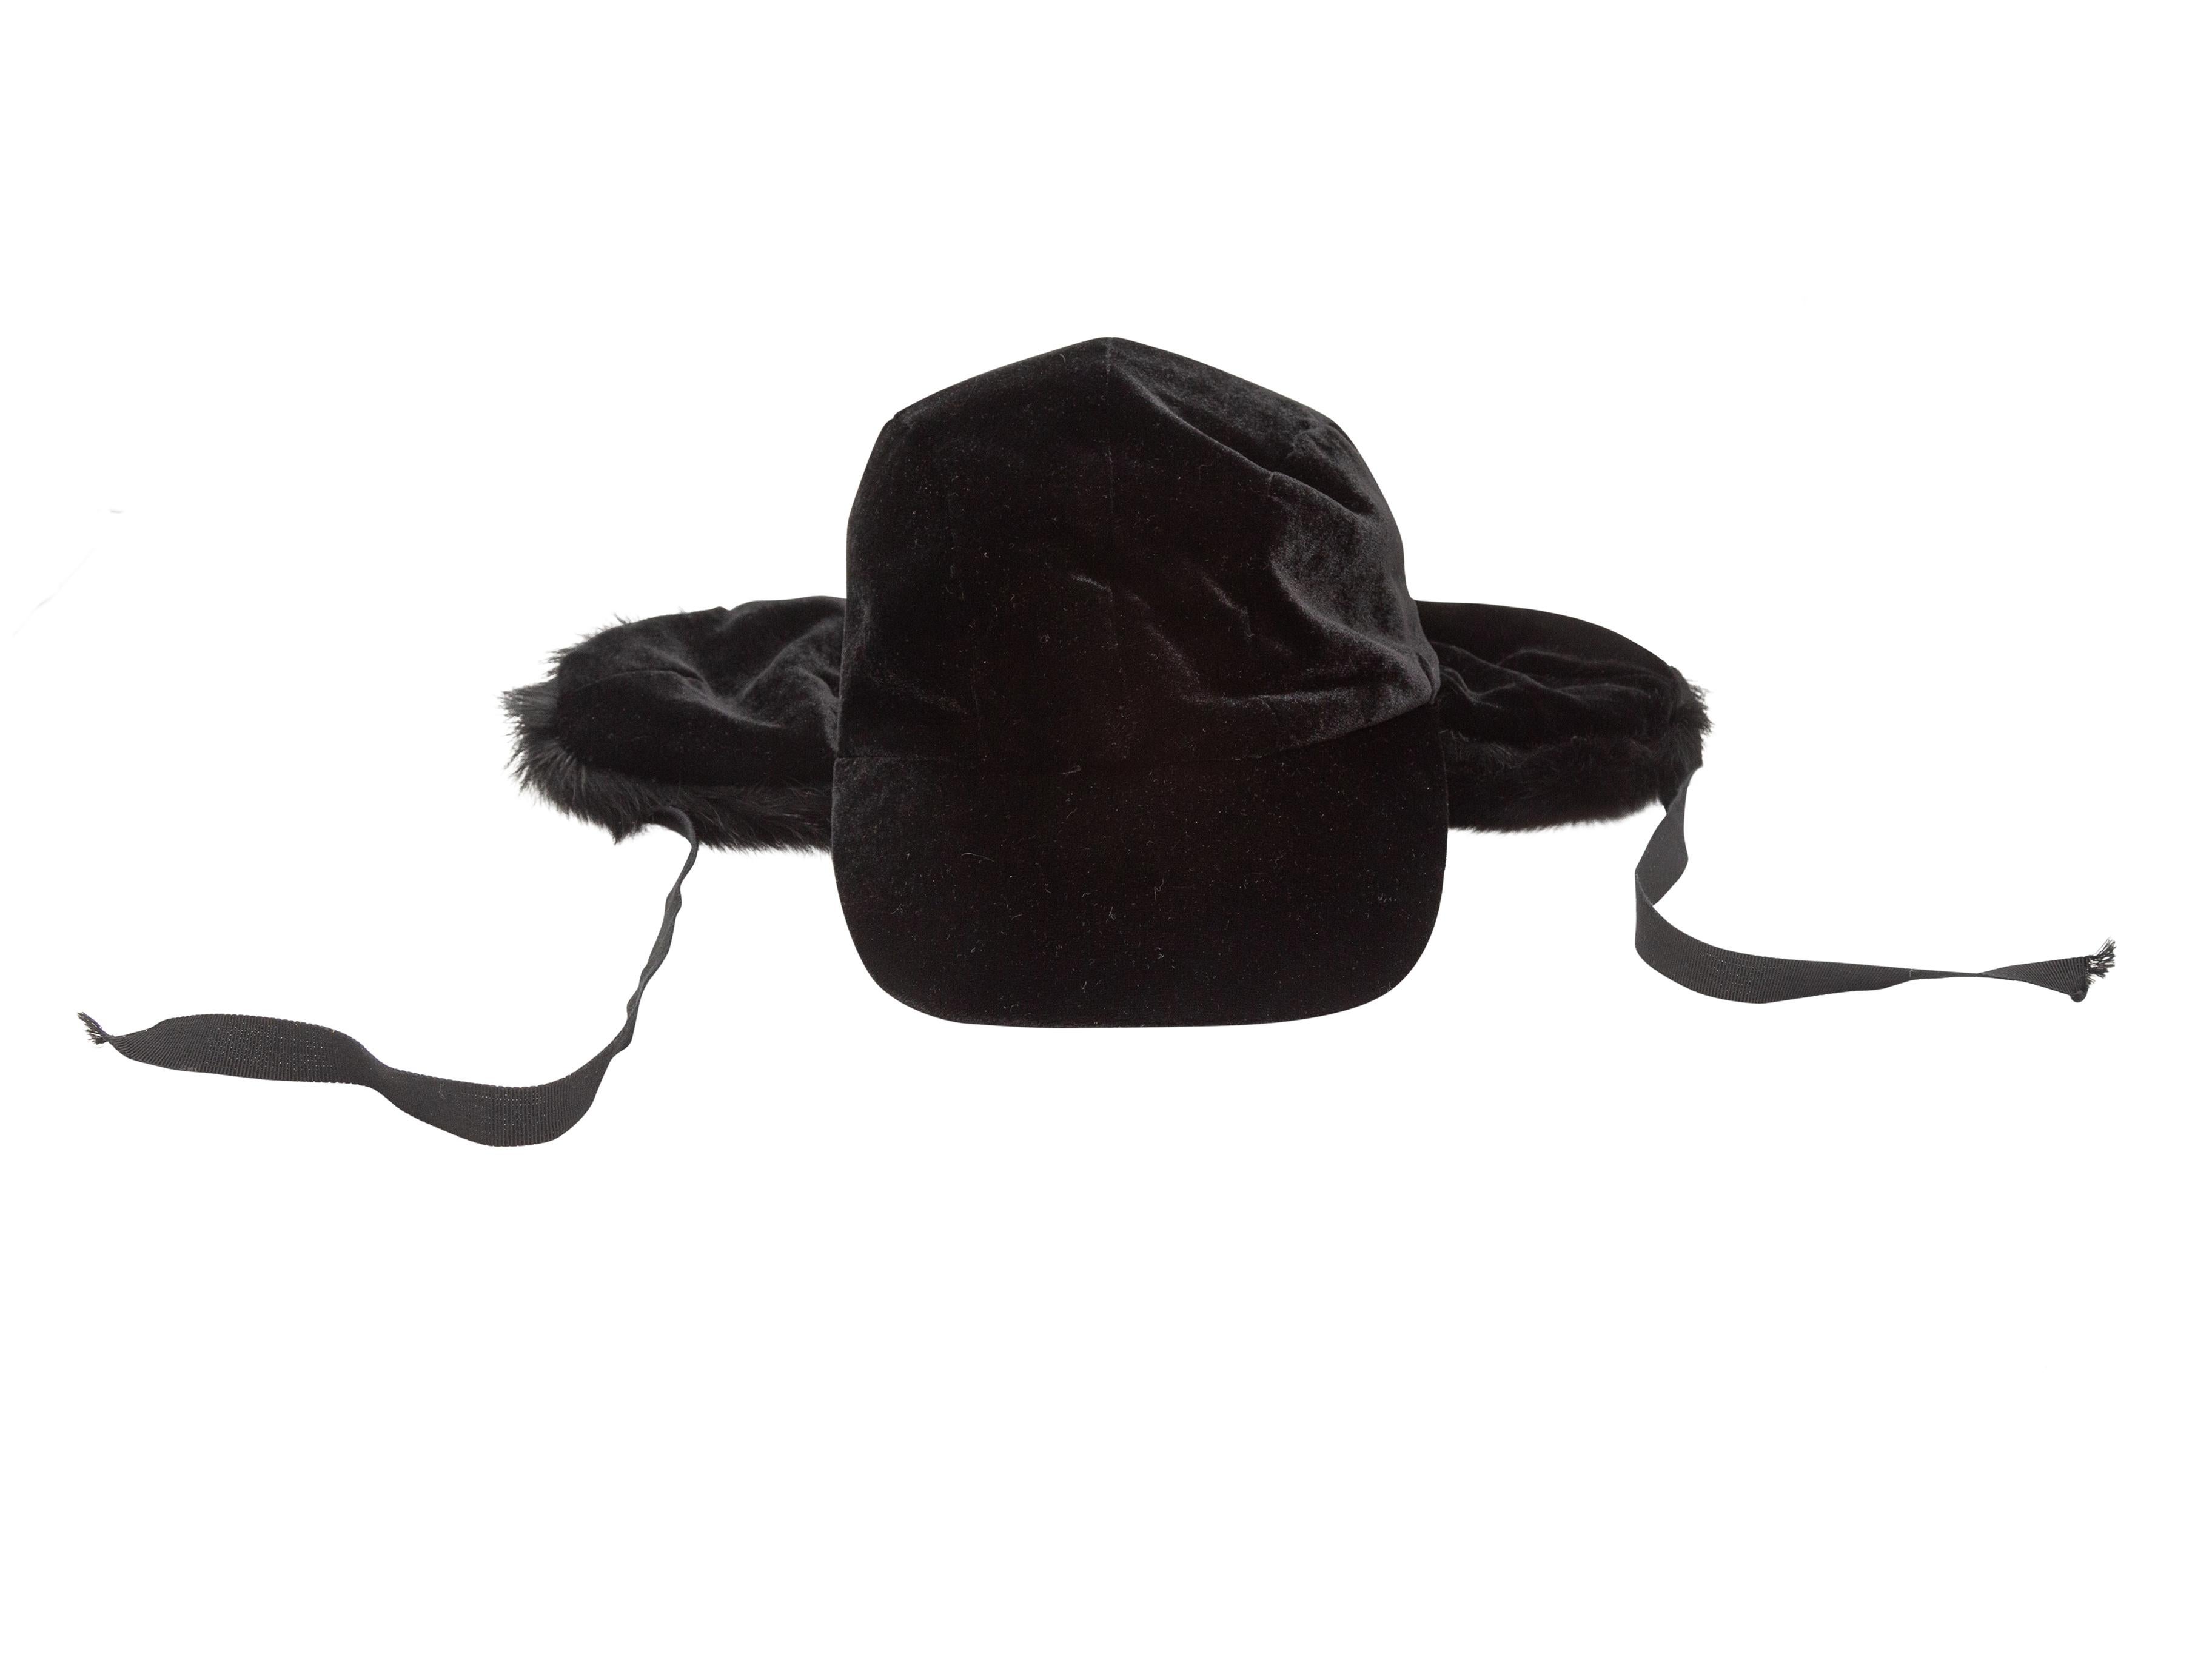 Product Details: Black velvet baseball cap with fur ear flaps by Patricia Underwood. 3.5